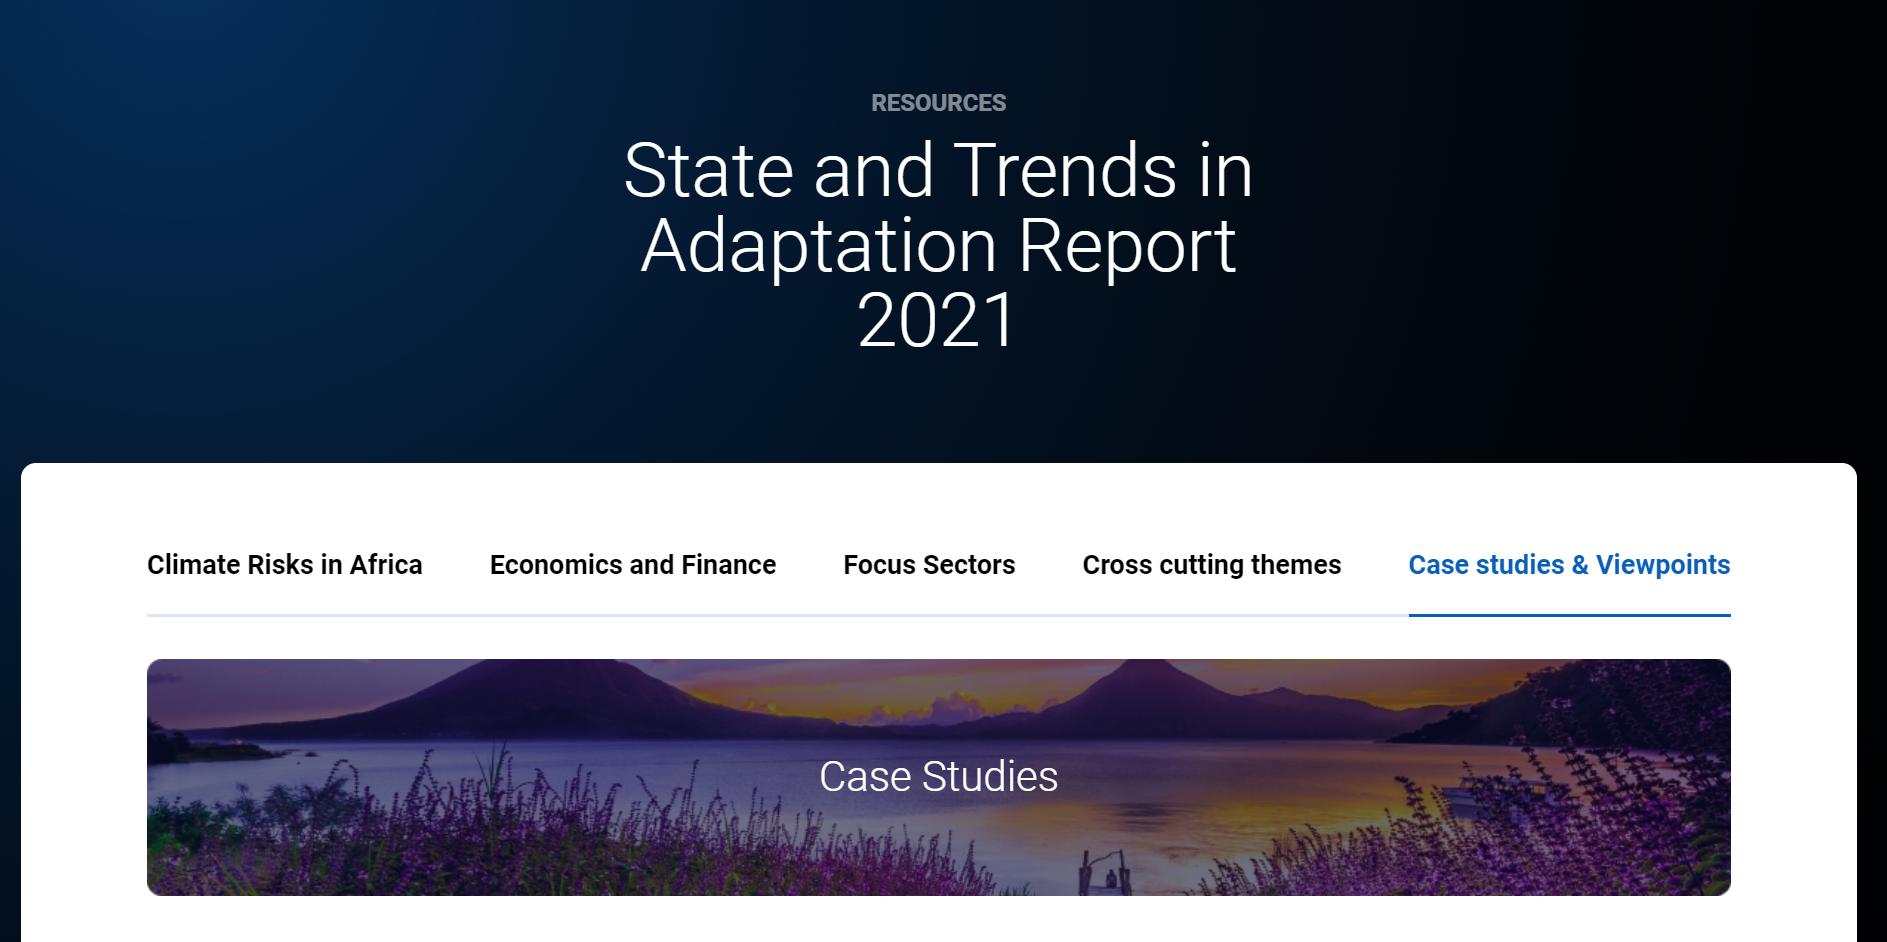 State and Trends in Adaptation Report 2021